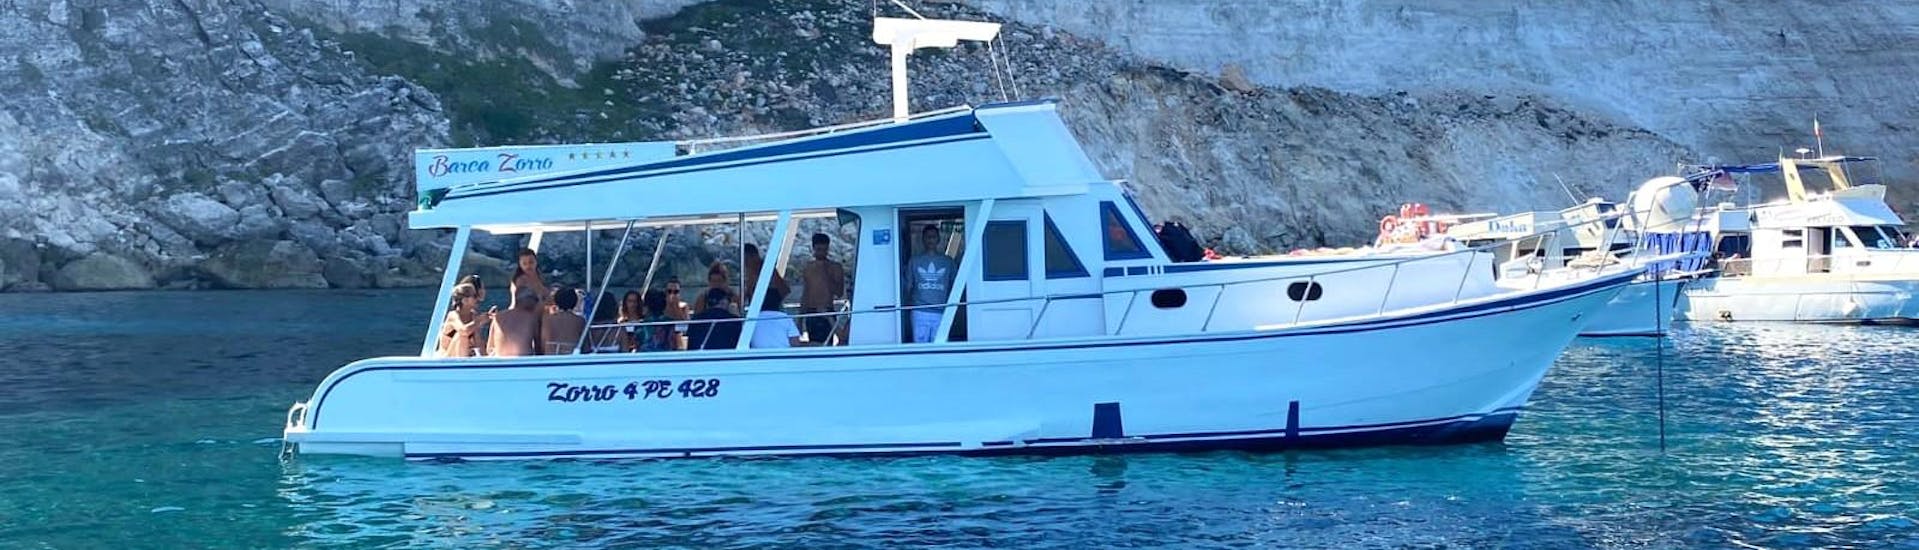 Picture of the motorboat used by Gita in Barca Zorro Lampedusa during the boat trips.